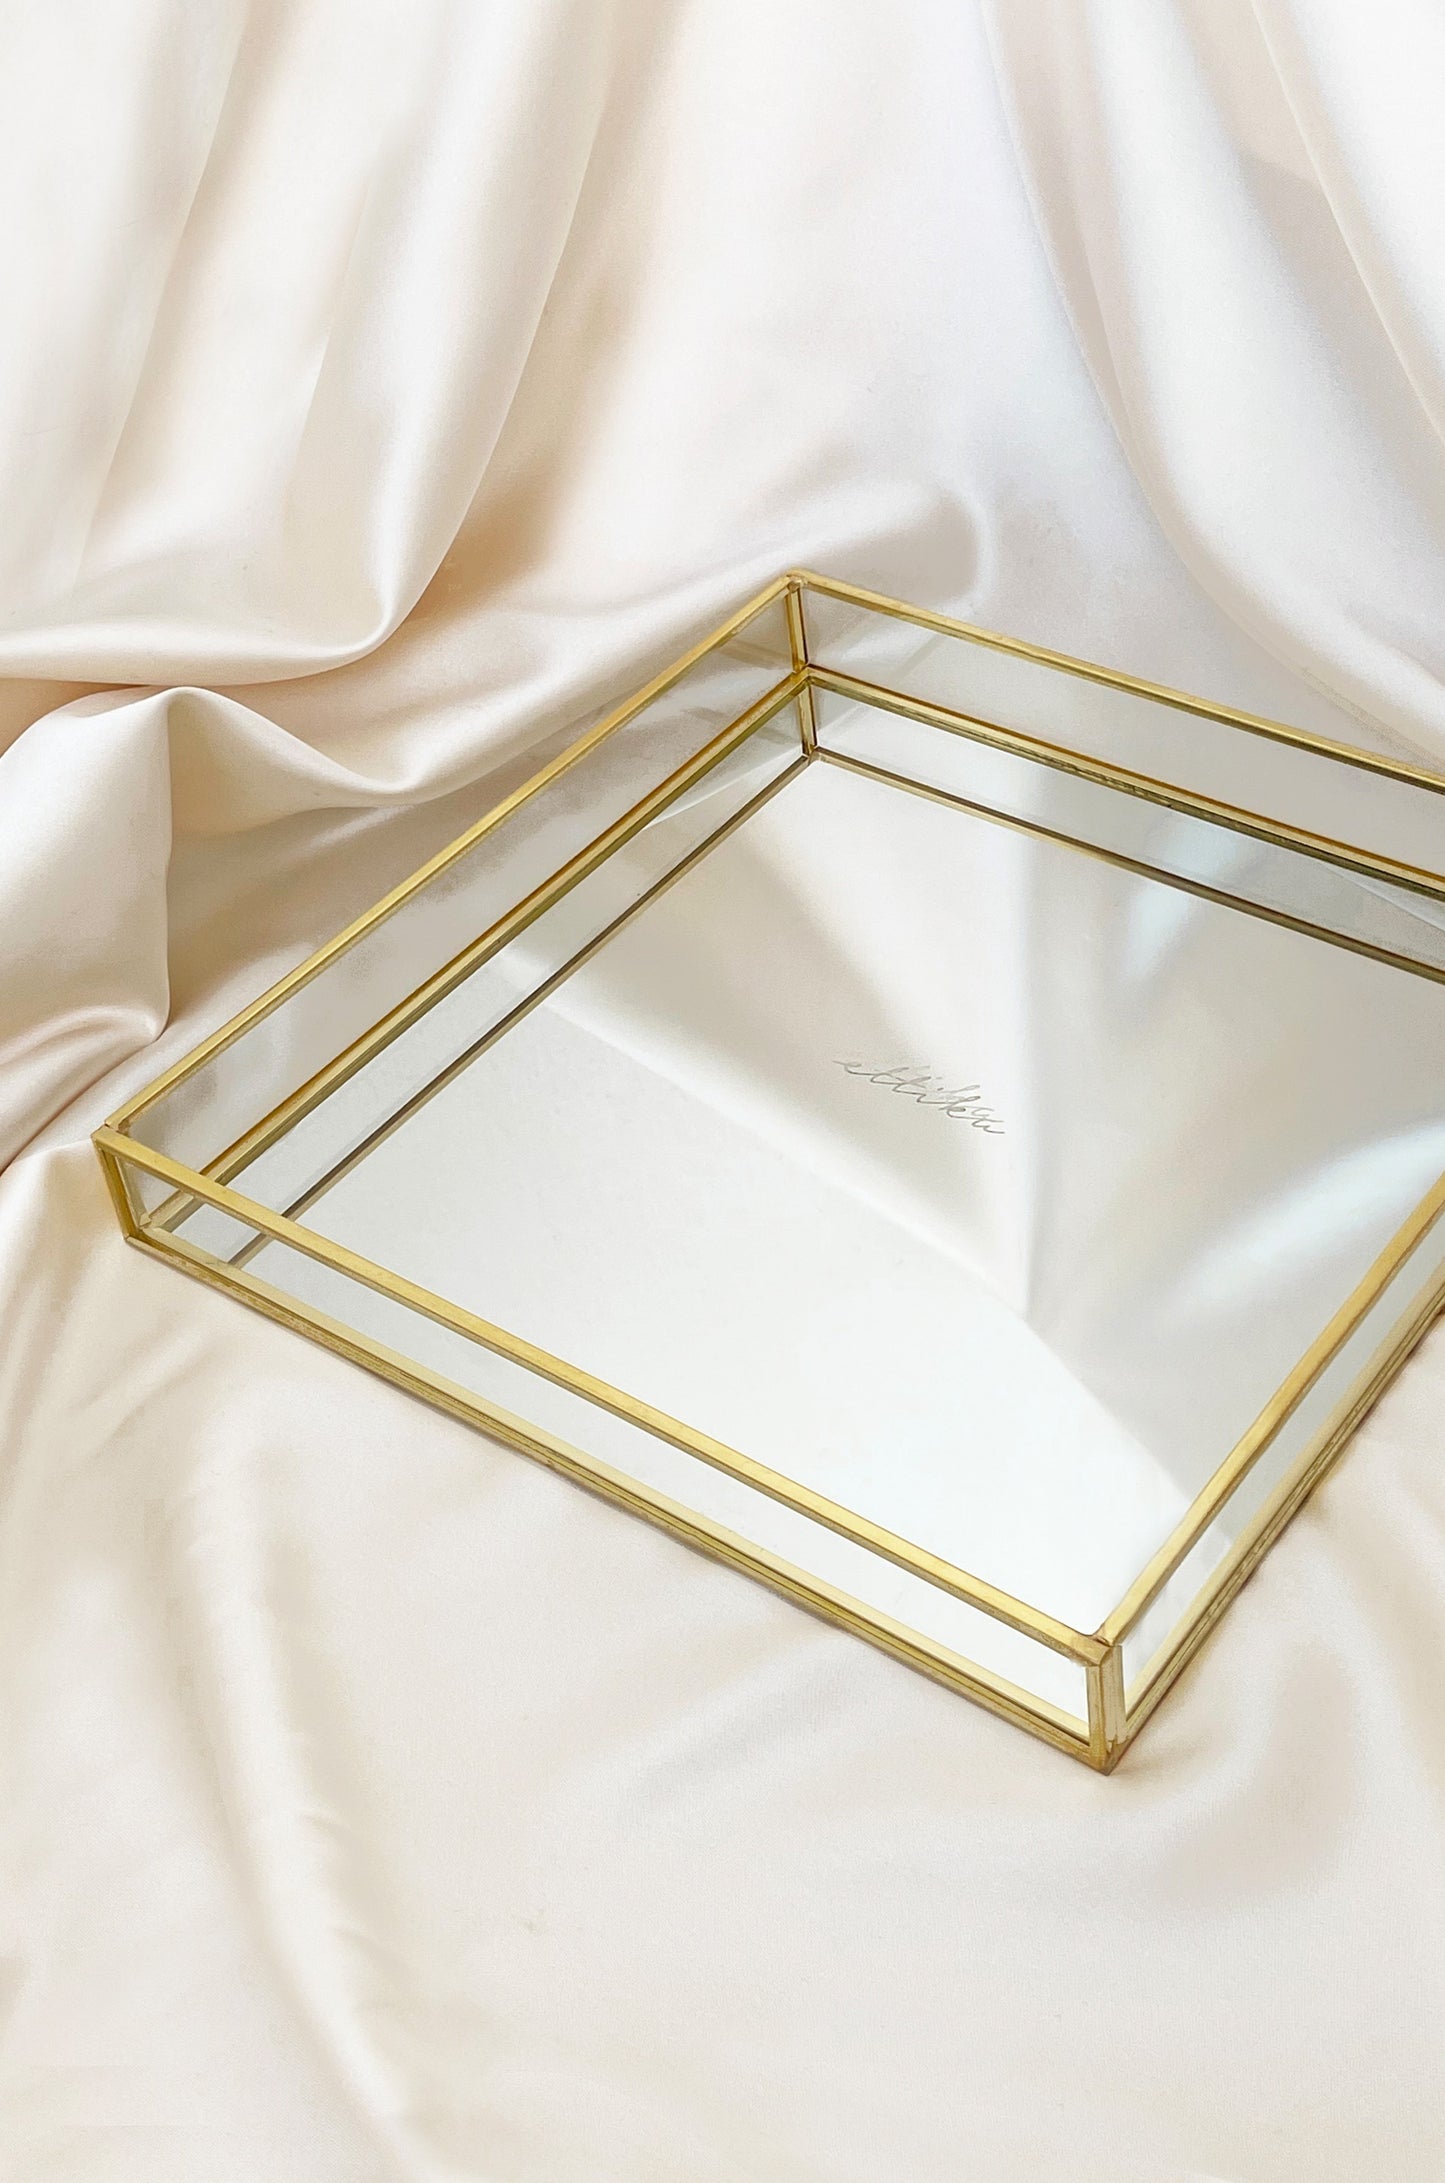 Large Square Mirror Bottom Jewelry and Display Tray on satin